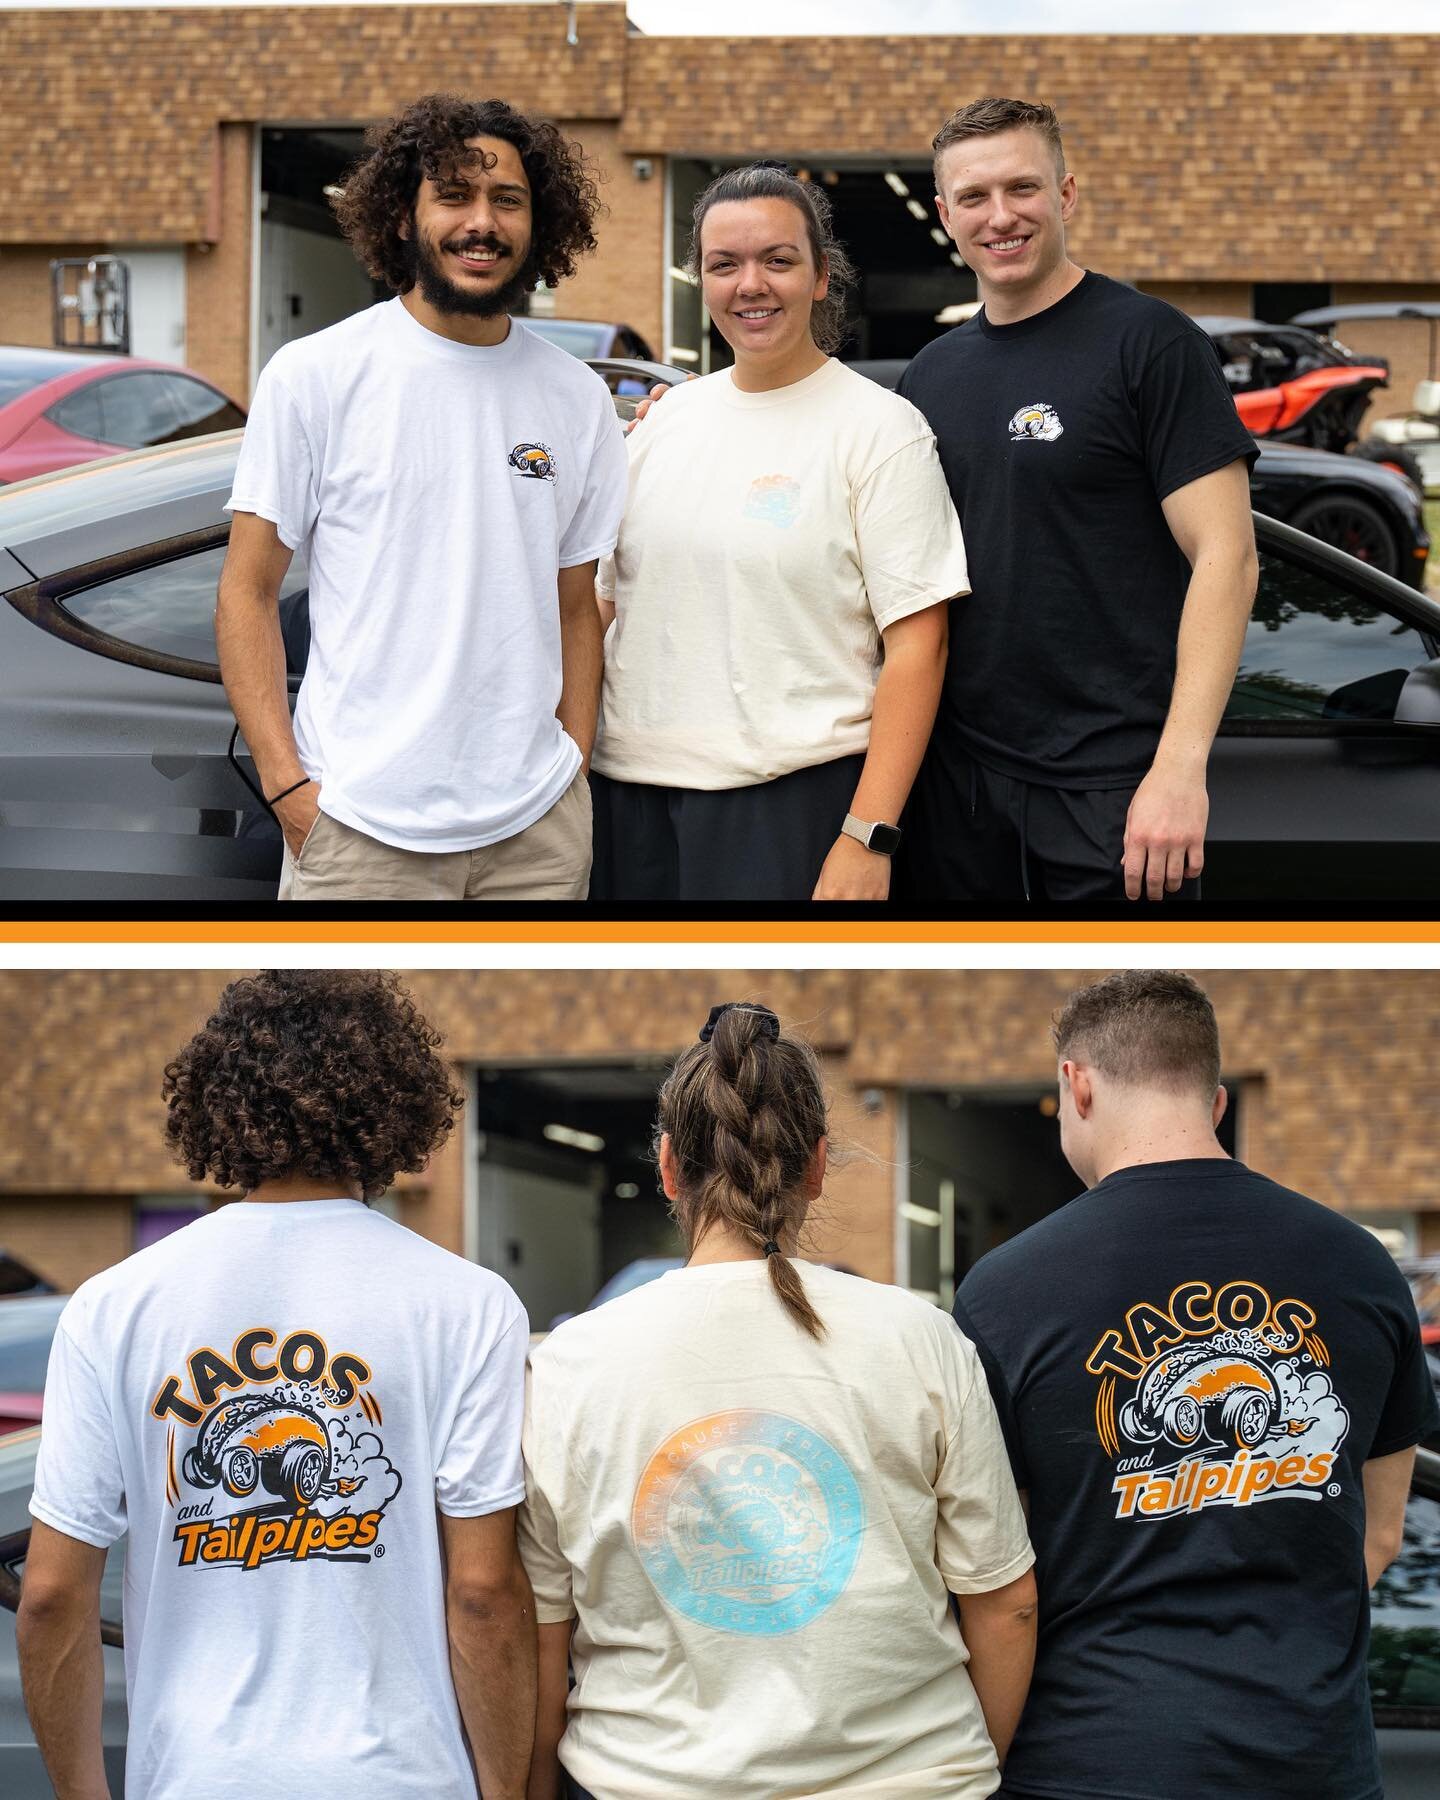 TNT tees &amp; stickers will be for sale at the Merch Table tomorrow🌮💨
.
Modeled by the Drew, Claire, and Casey.
.
The &ldquo;TnT OG Tee&rdquo; will be available in black and white for $35 
.
The &ldquo;Summer Limited Edition TnT Comfort Colours te